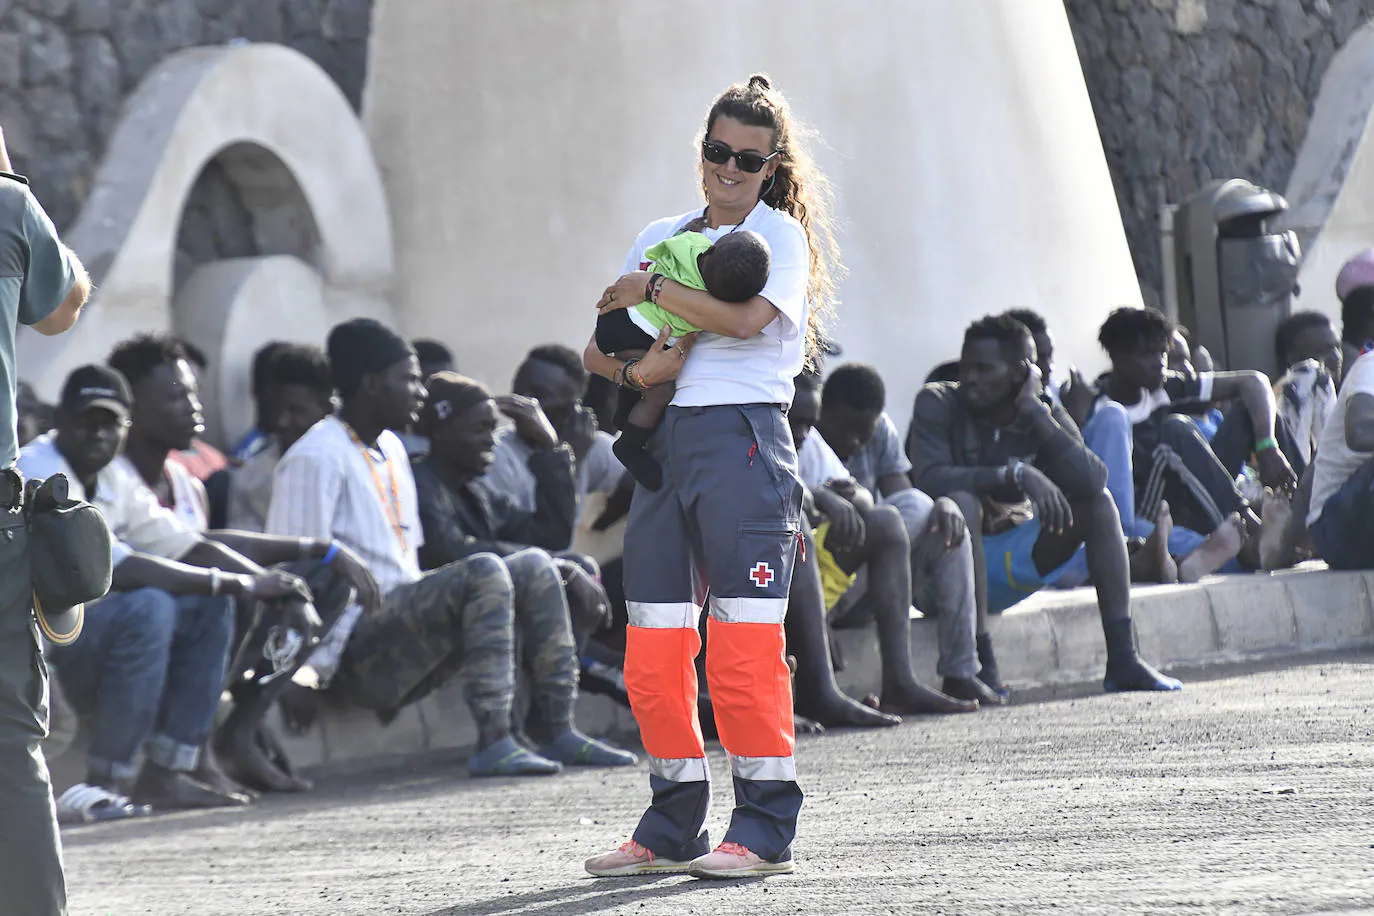 Canary Islands, on the referral of migrant minors: "It is as good, necessary and urgent as the amnesty"